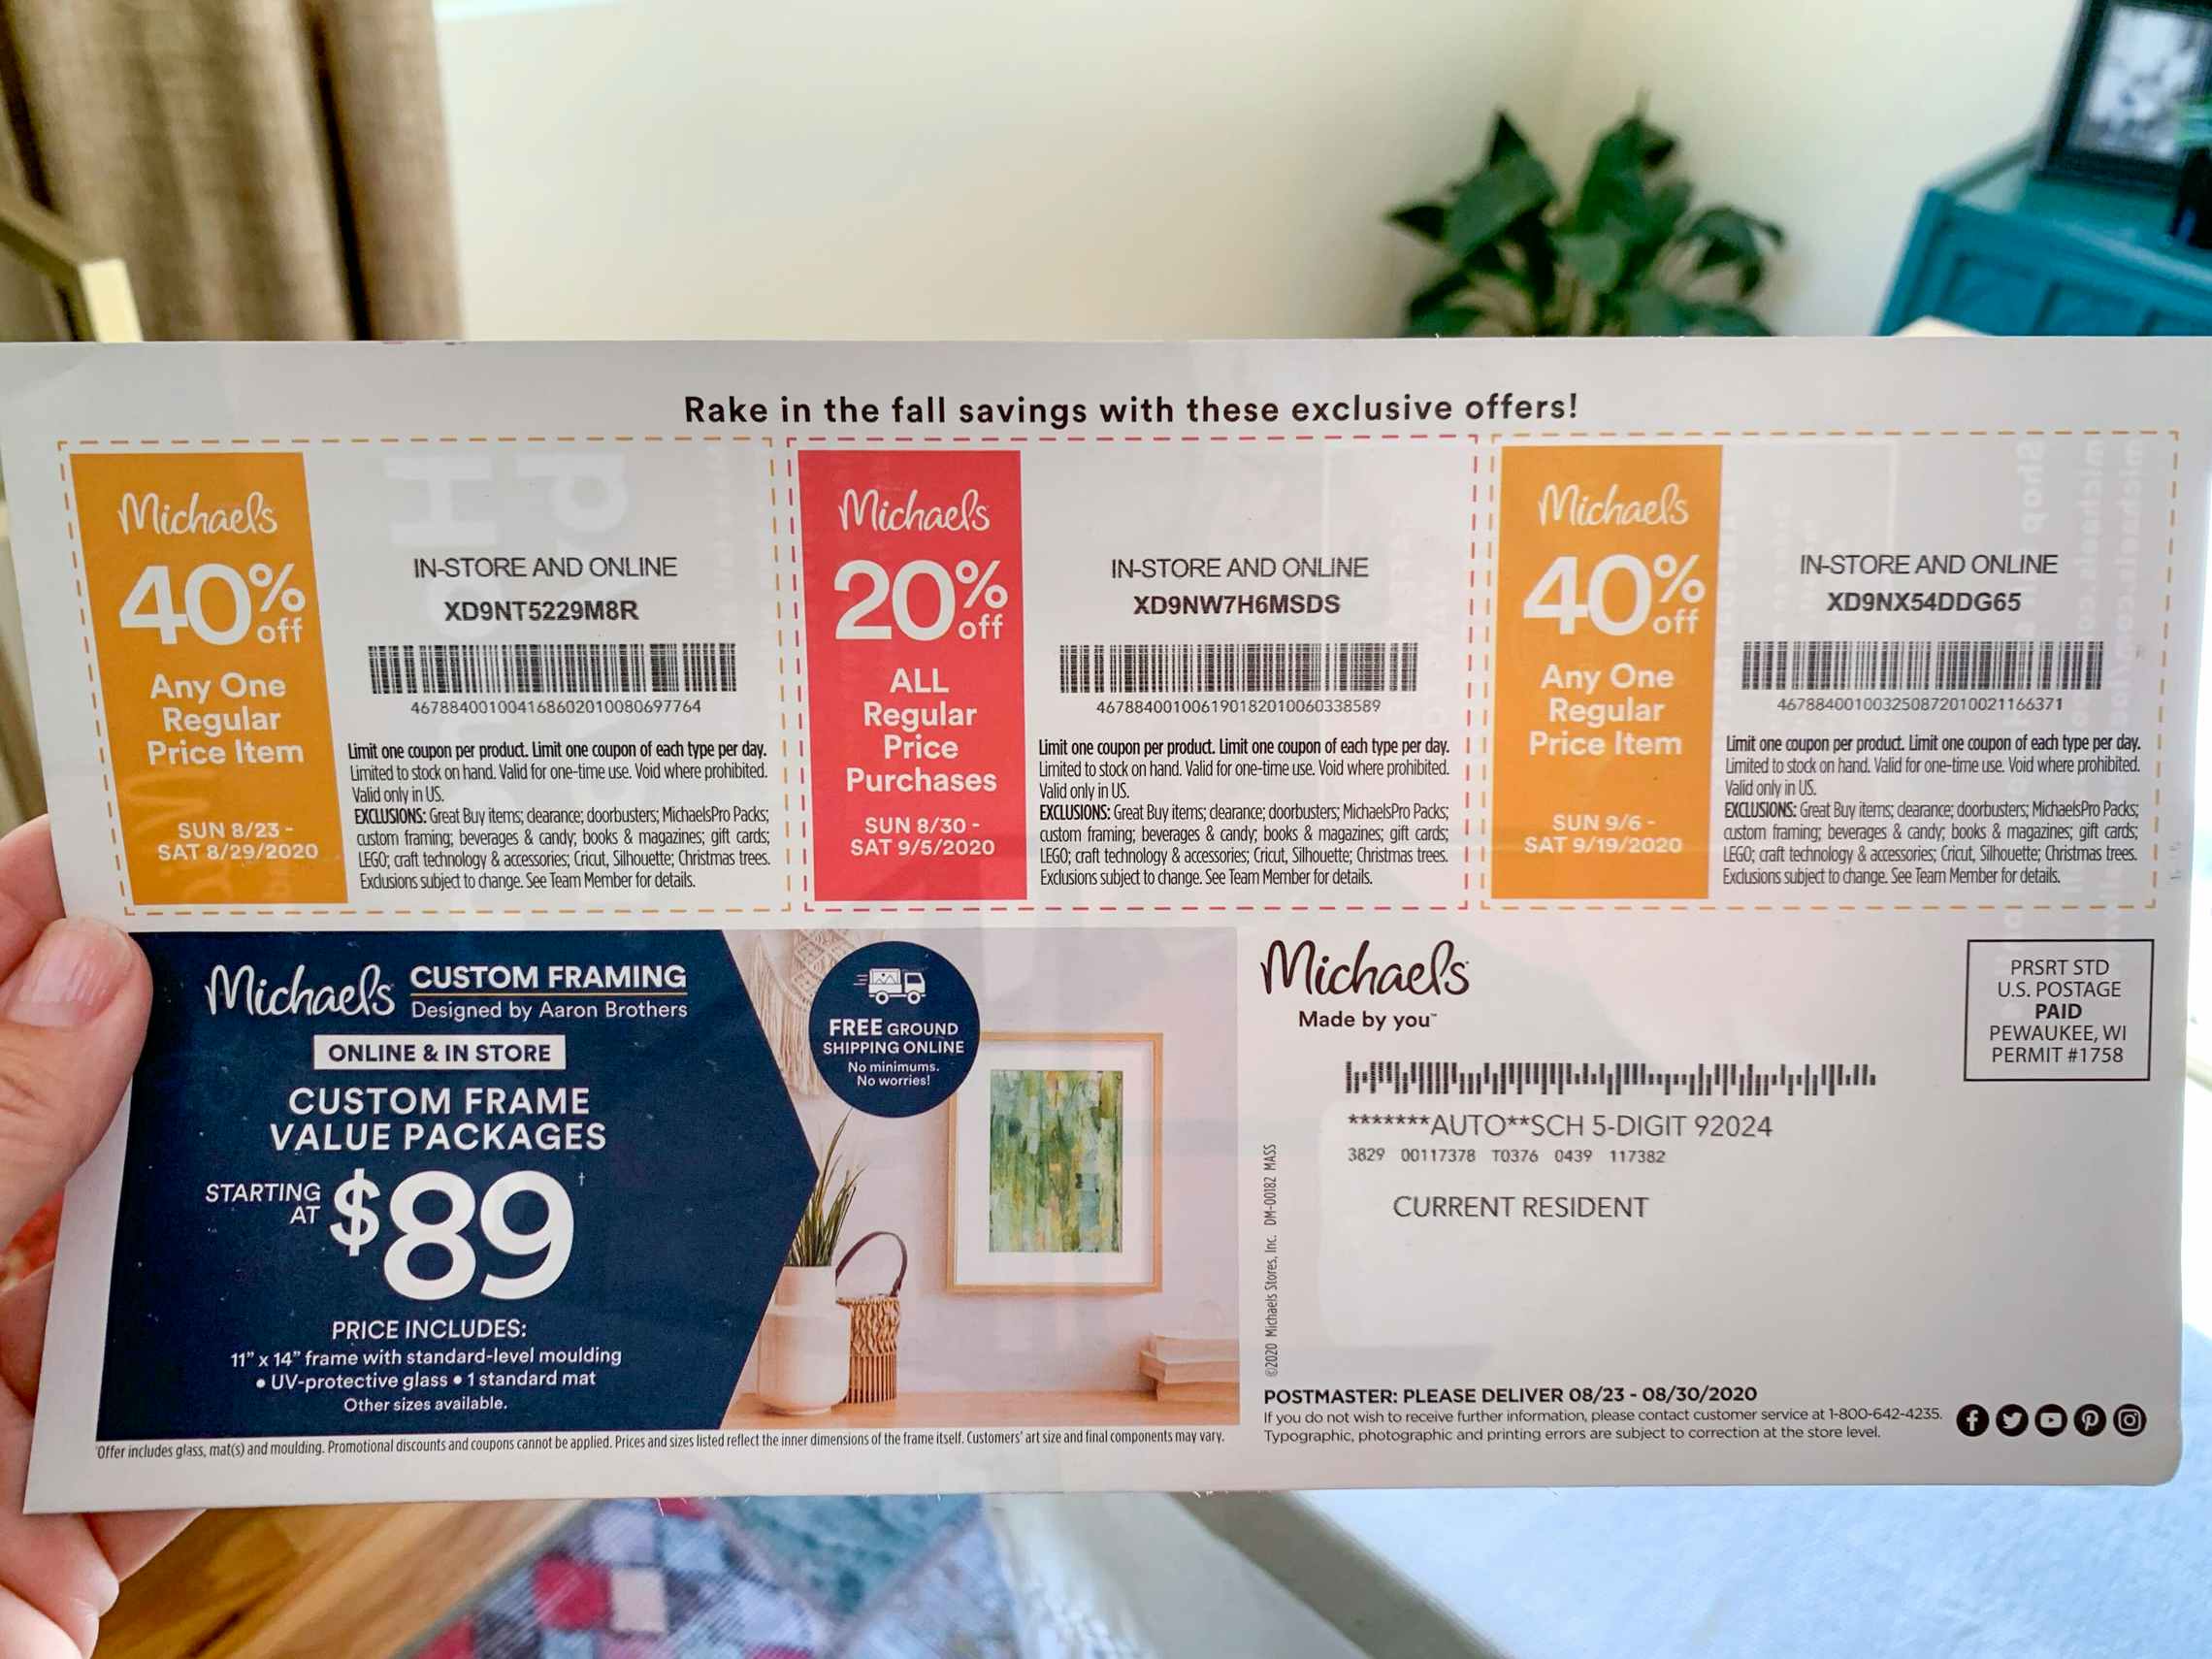 A coupon mailer from Michaels craft store